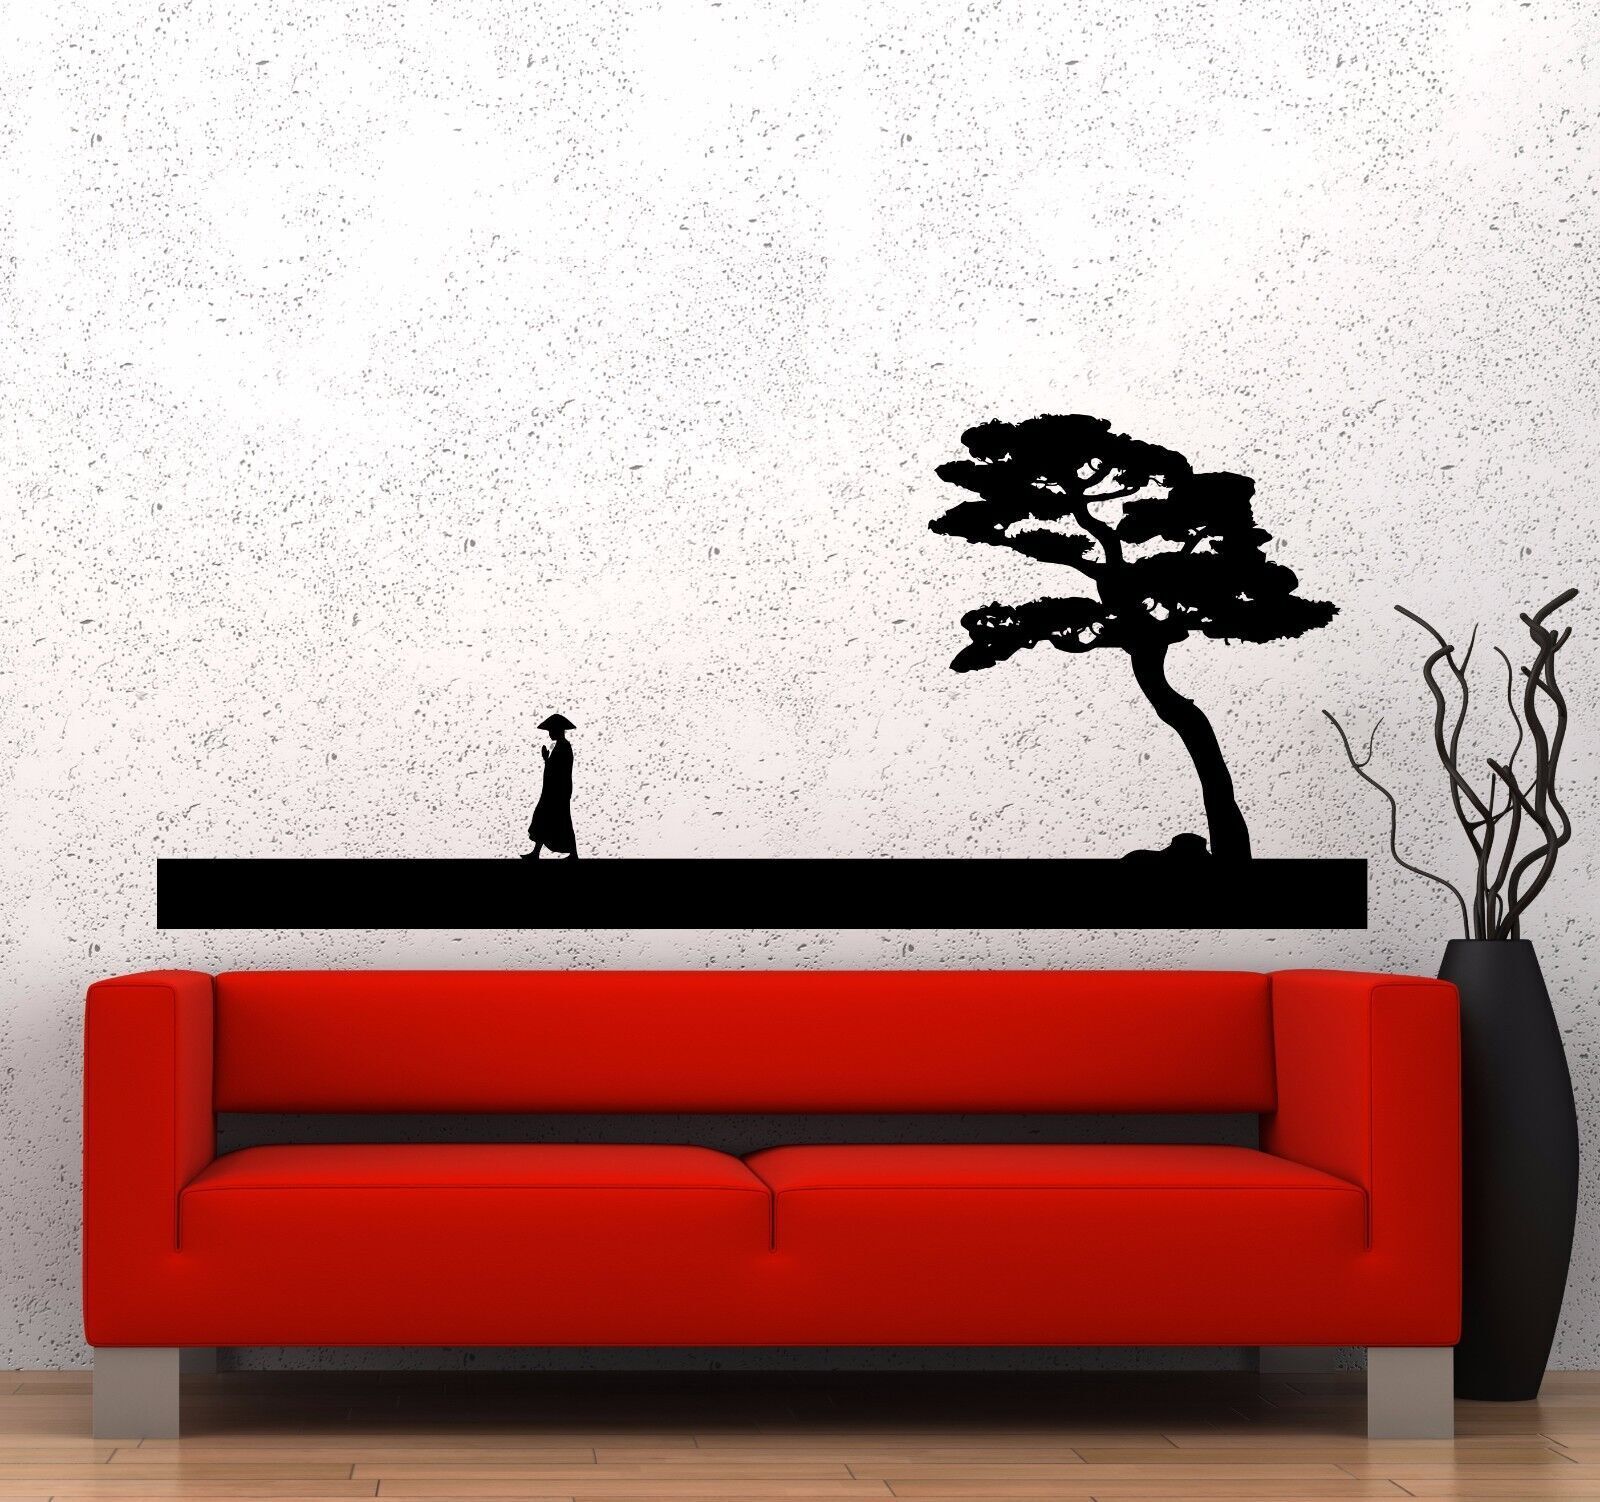 Vinyl Wall Decal Asian Decor Chinese Art Oriental China Stickers (234ig)